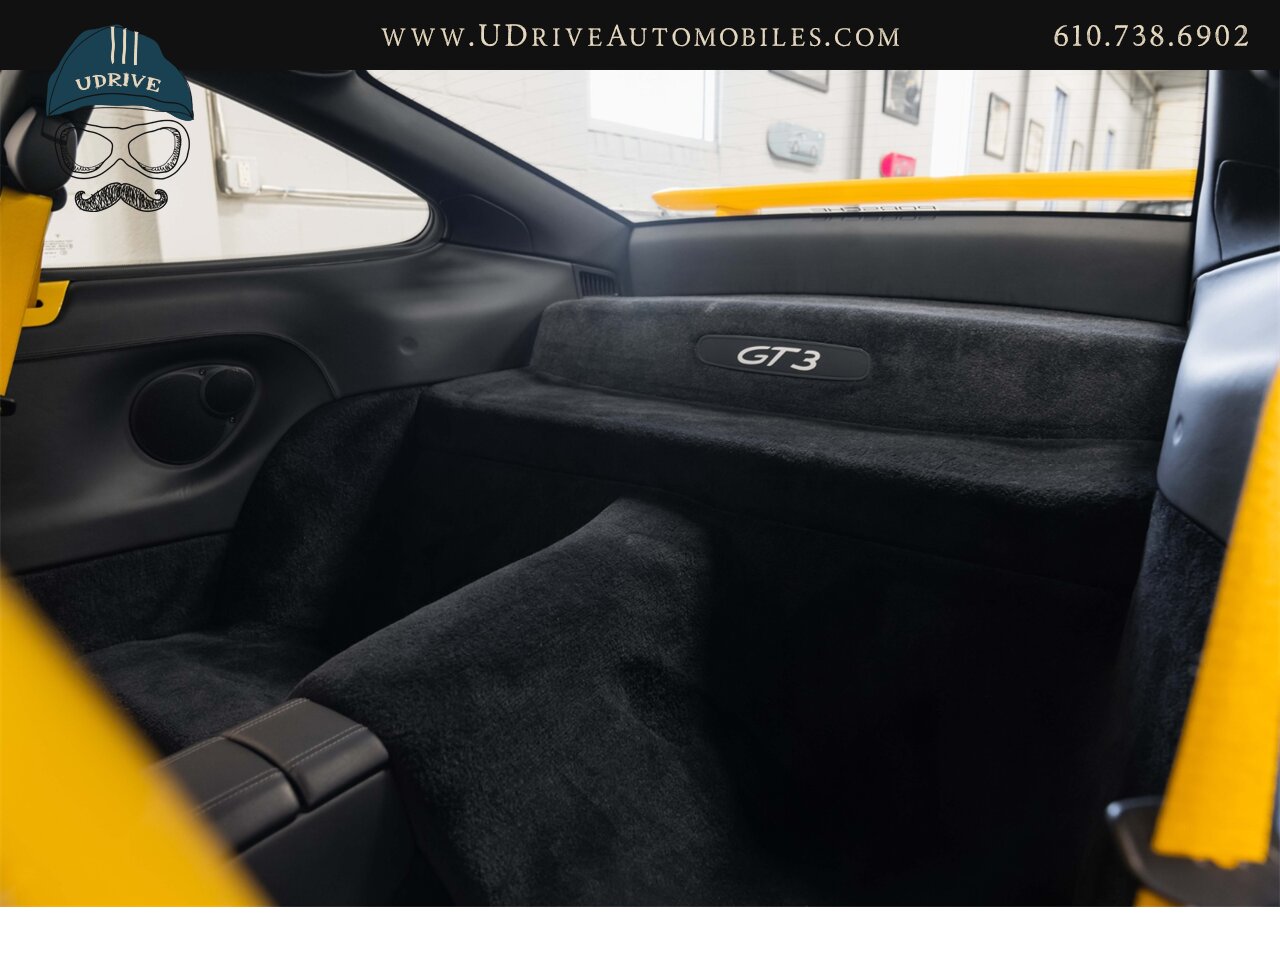 2005 Porsche 911 GT3 996 Speed Yellow Sport Seats Pntd Hardbacks  Pntd Console Deviating Stitch Yellow Accents Throughout - Photo 46 - West Chester, PA 19382